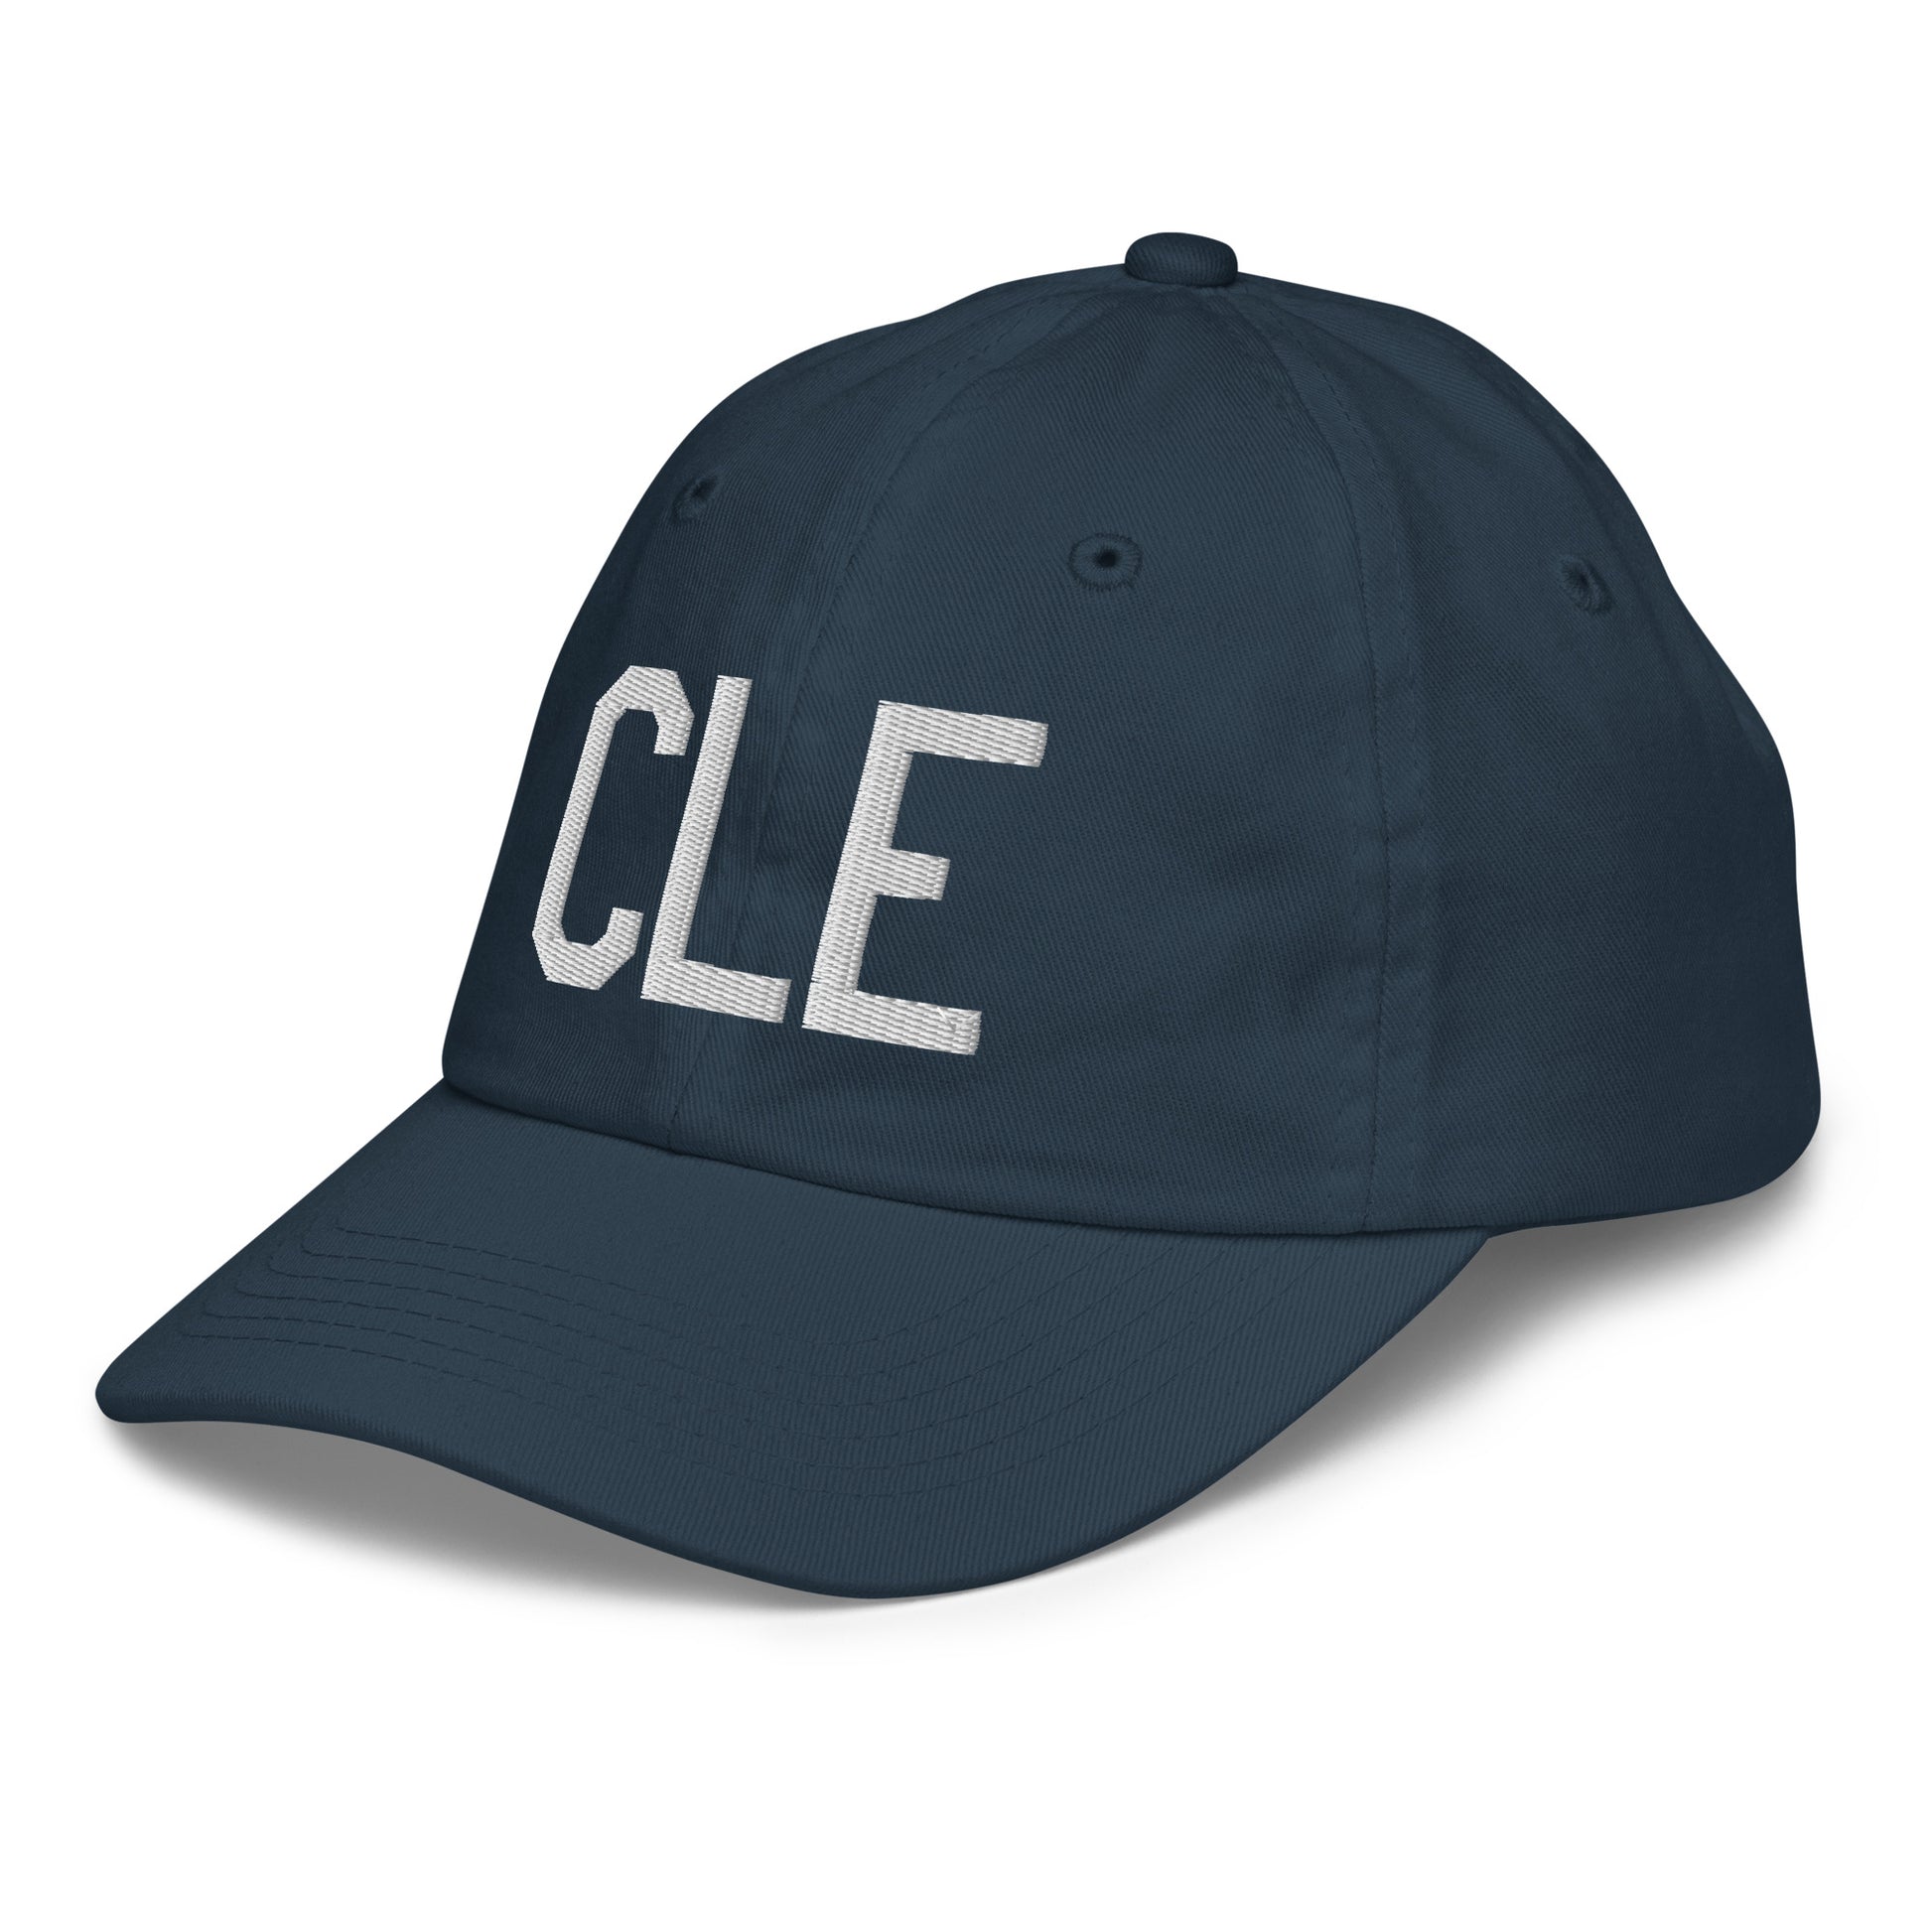 Airport Code Kid's Baseball Cap - White • CLE Cleveland • YHM Designs - Image 16